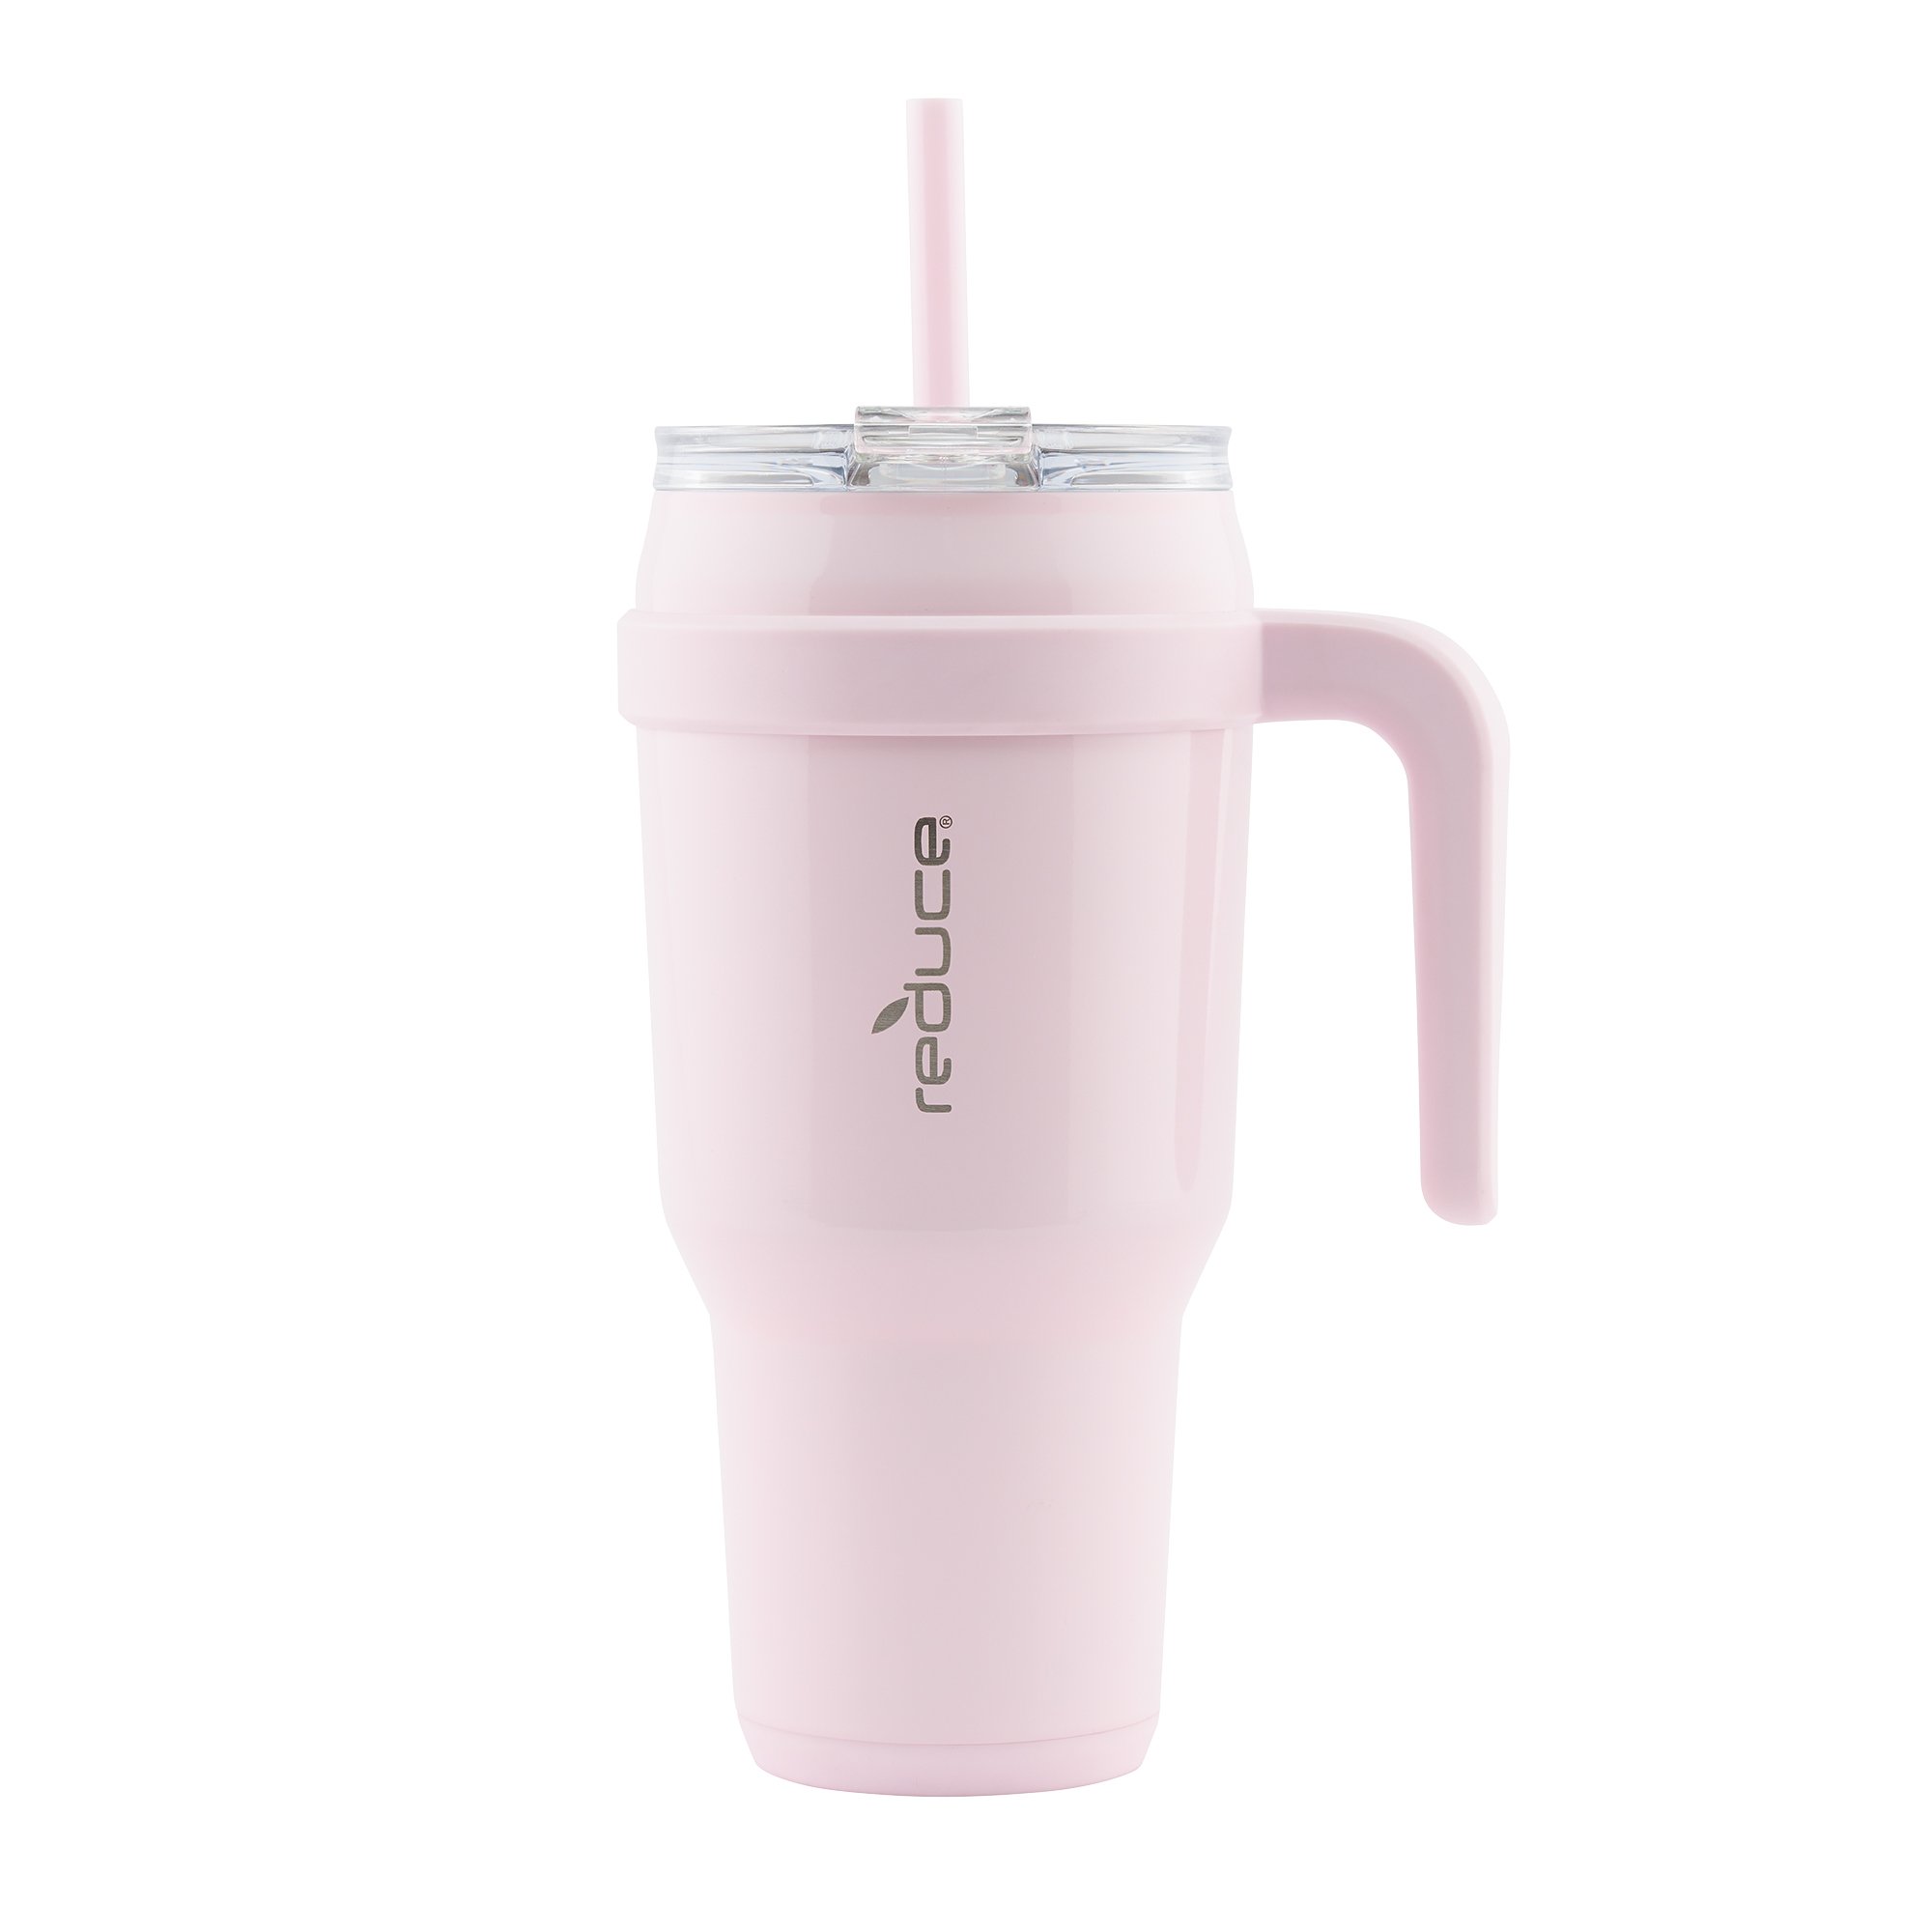 Reduce Cold One Tumbler with Handle - Pink Quartz - Shop Cups ...